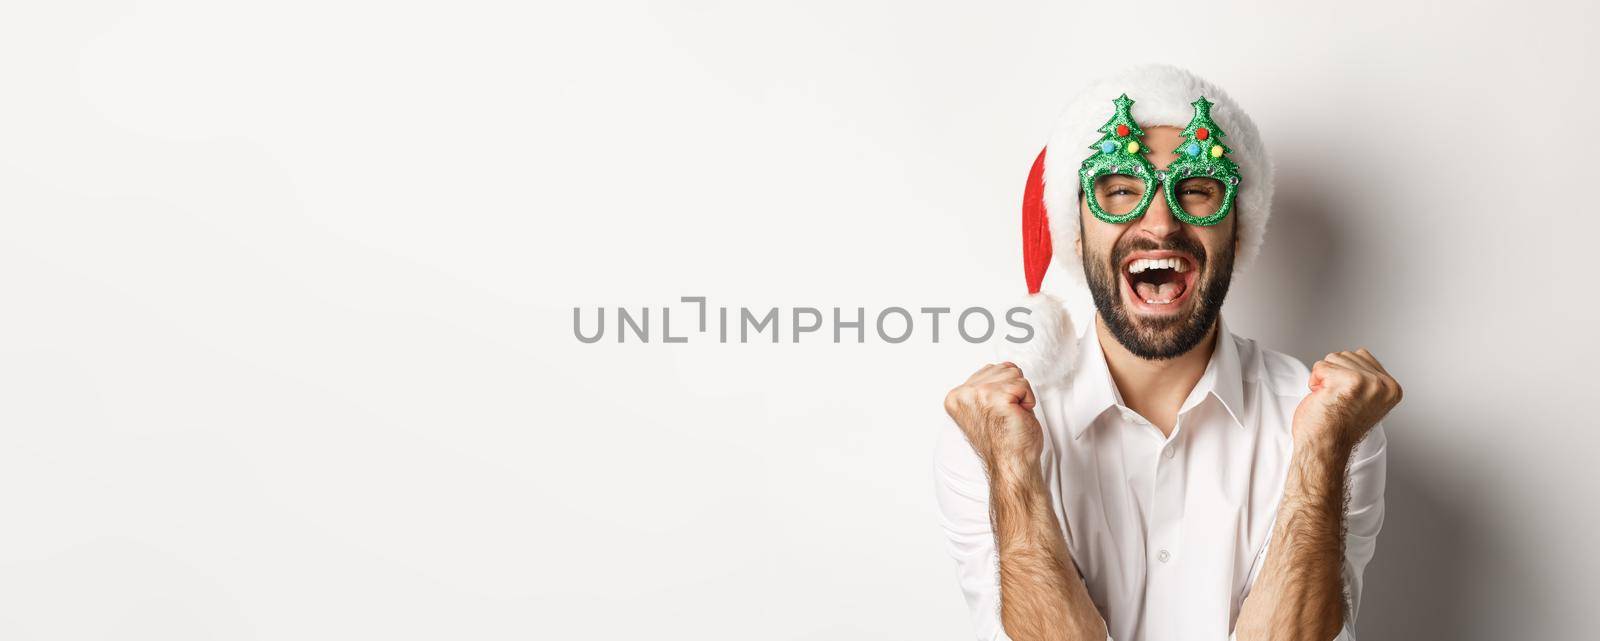 Close-up of man celebrating christmas or new year, wearing xmas party glasses and santa hat, rejoicing and shouting of joy, standing over white background.